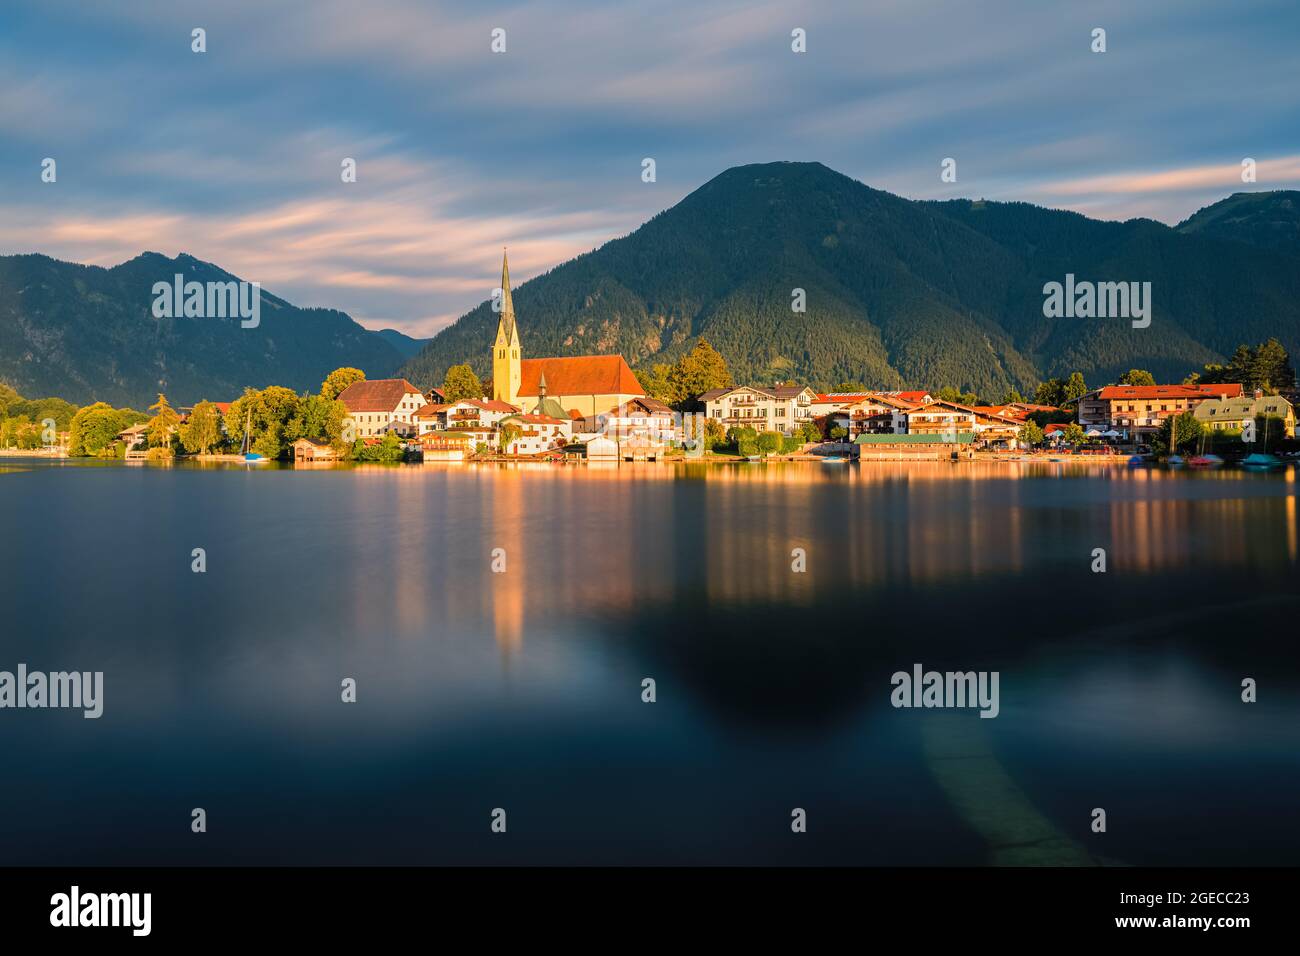 Rottach-Egern is a municipality and town located at Lake Tegernsee in the district of Miesbach in Upper Bavaria, Germany, about 35 miles south of cent Stock Photo